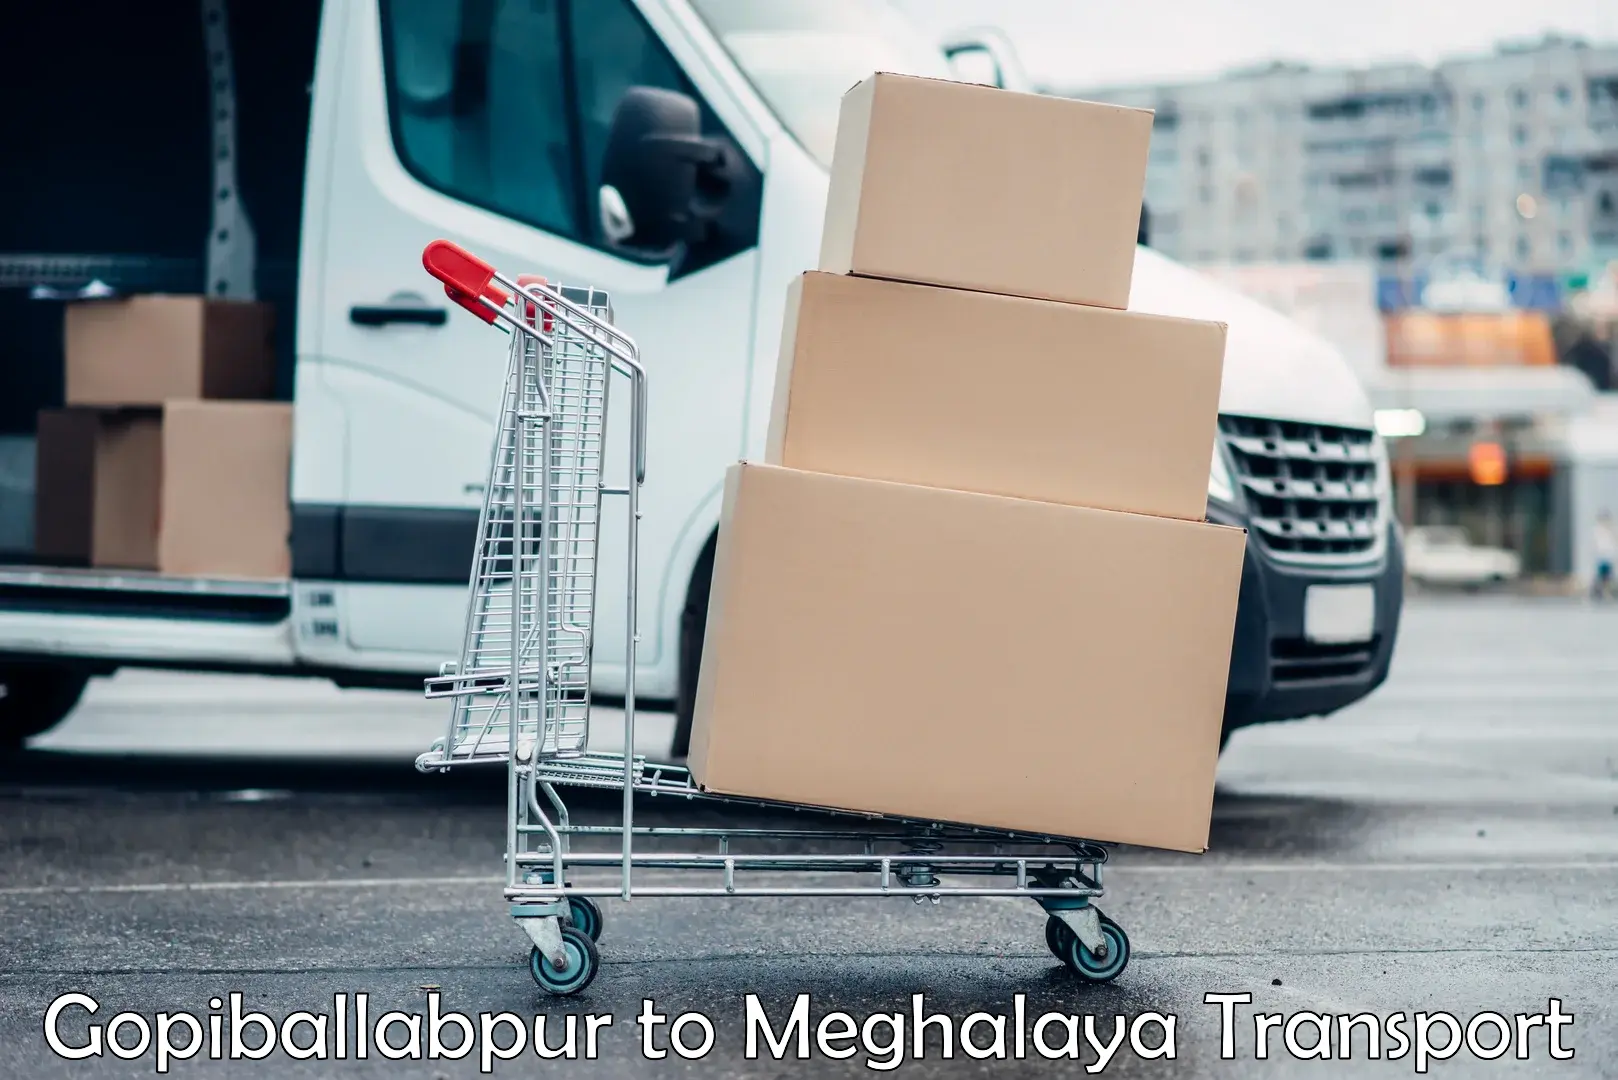 Goods transport services Gopiballabpur to Umsaw